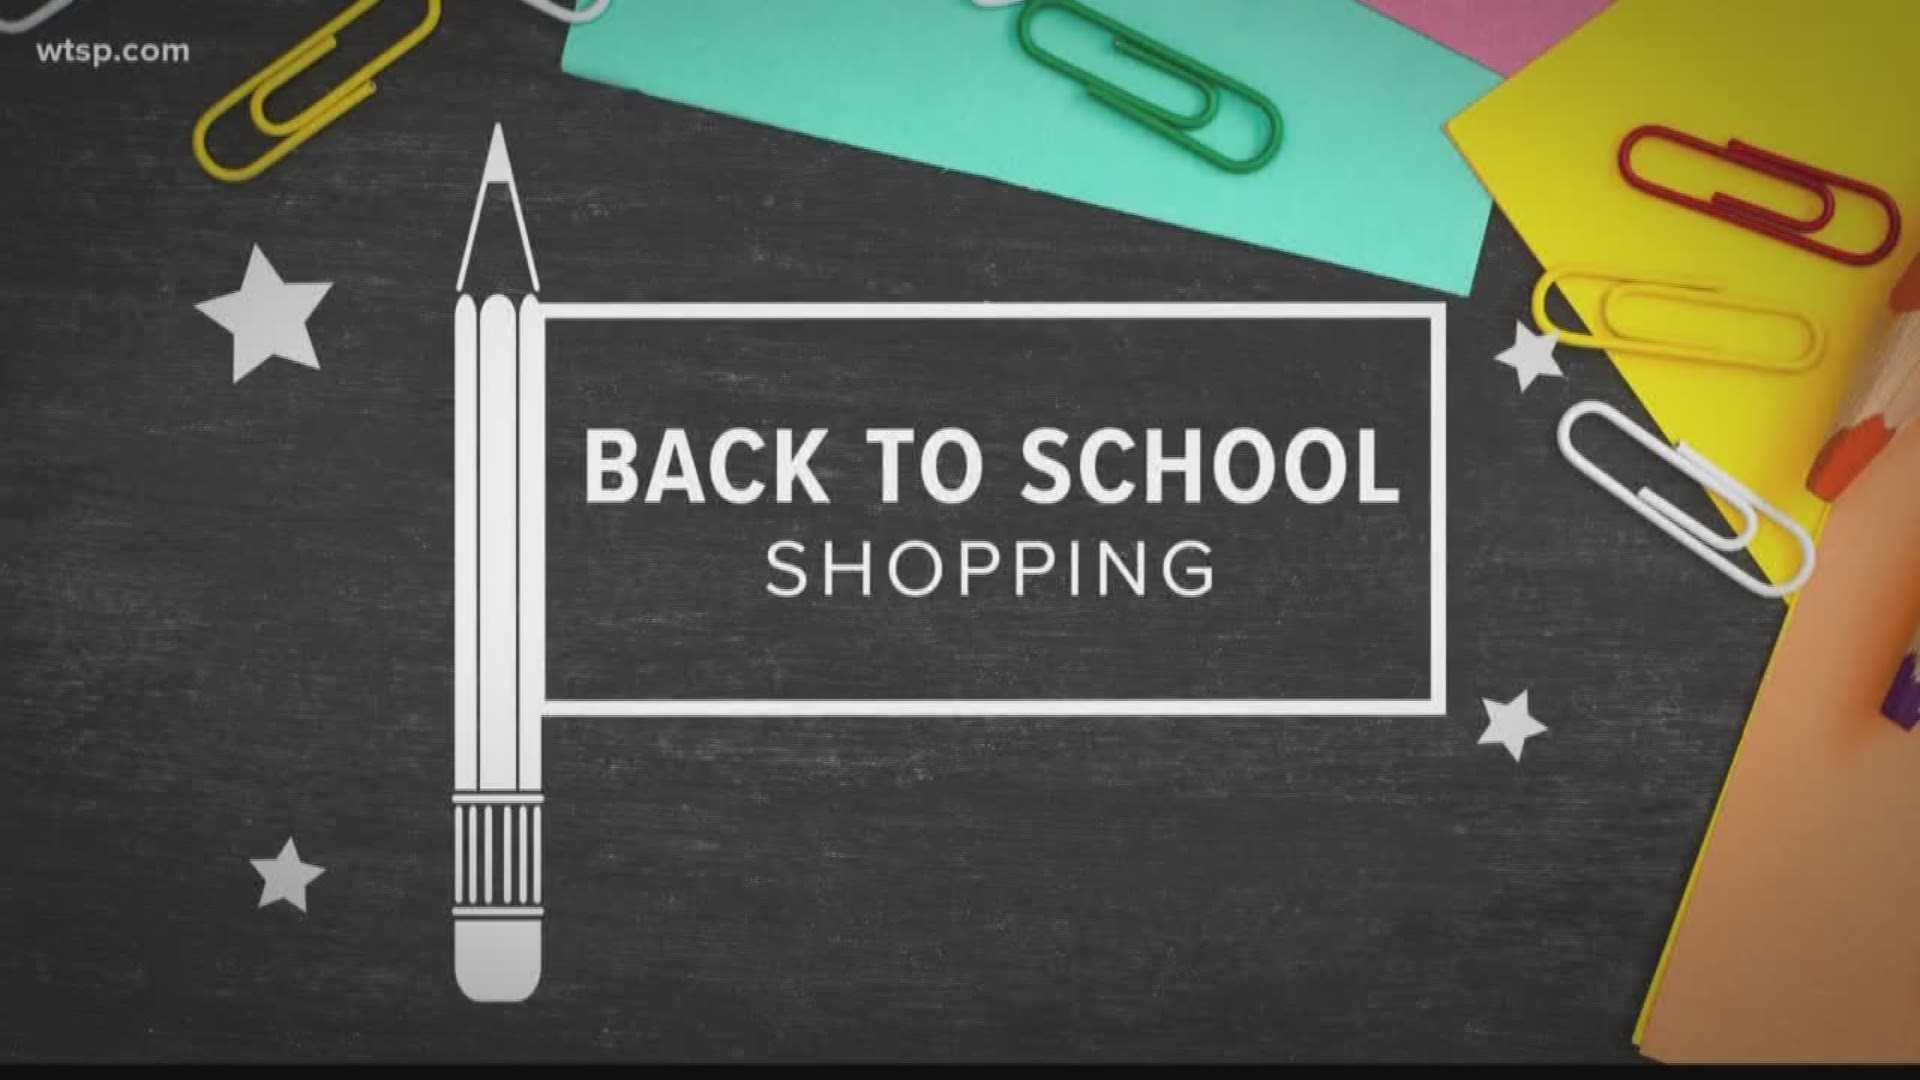 Florida’s annual back-to-school sales tax holiday starts Friday and computers are back on the list of tax-free items.

Consumers in Florida are exempt from paying sales tax on the following items Aug. 2-6:

Clothes and shoes selling for $60 or less
School supplies selling for $15 or less
Computers selling for $1,000 or less purchased for noncommercial home or personal use